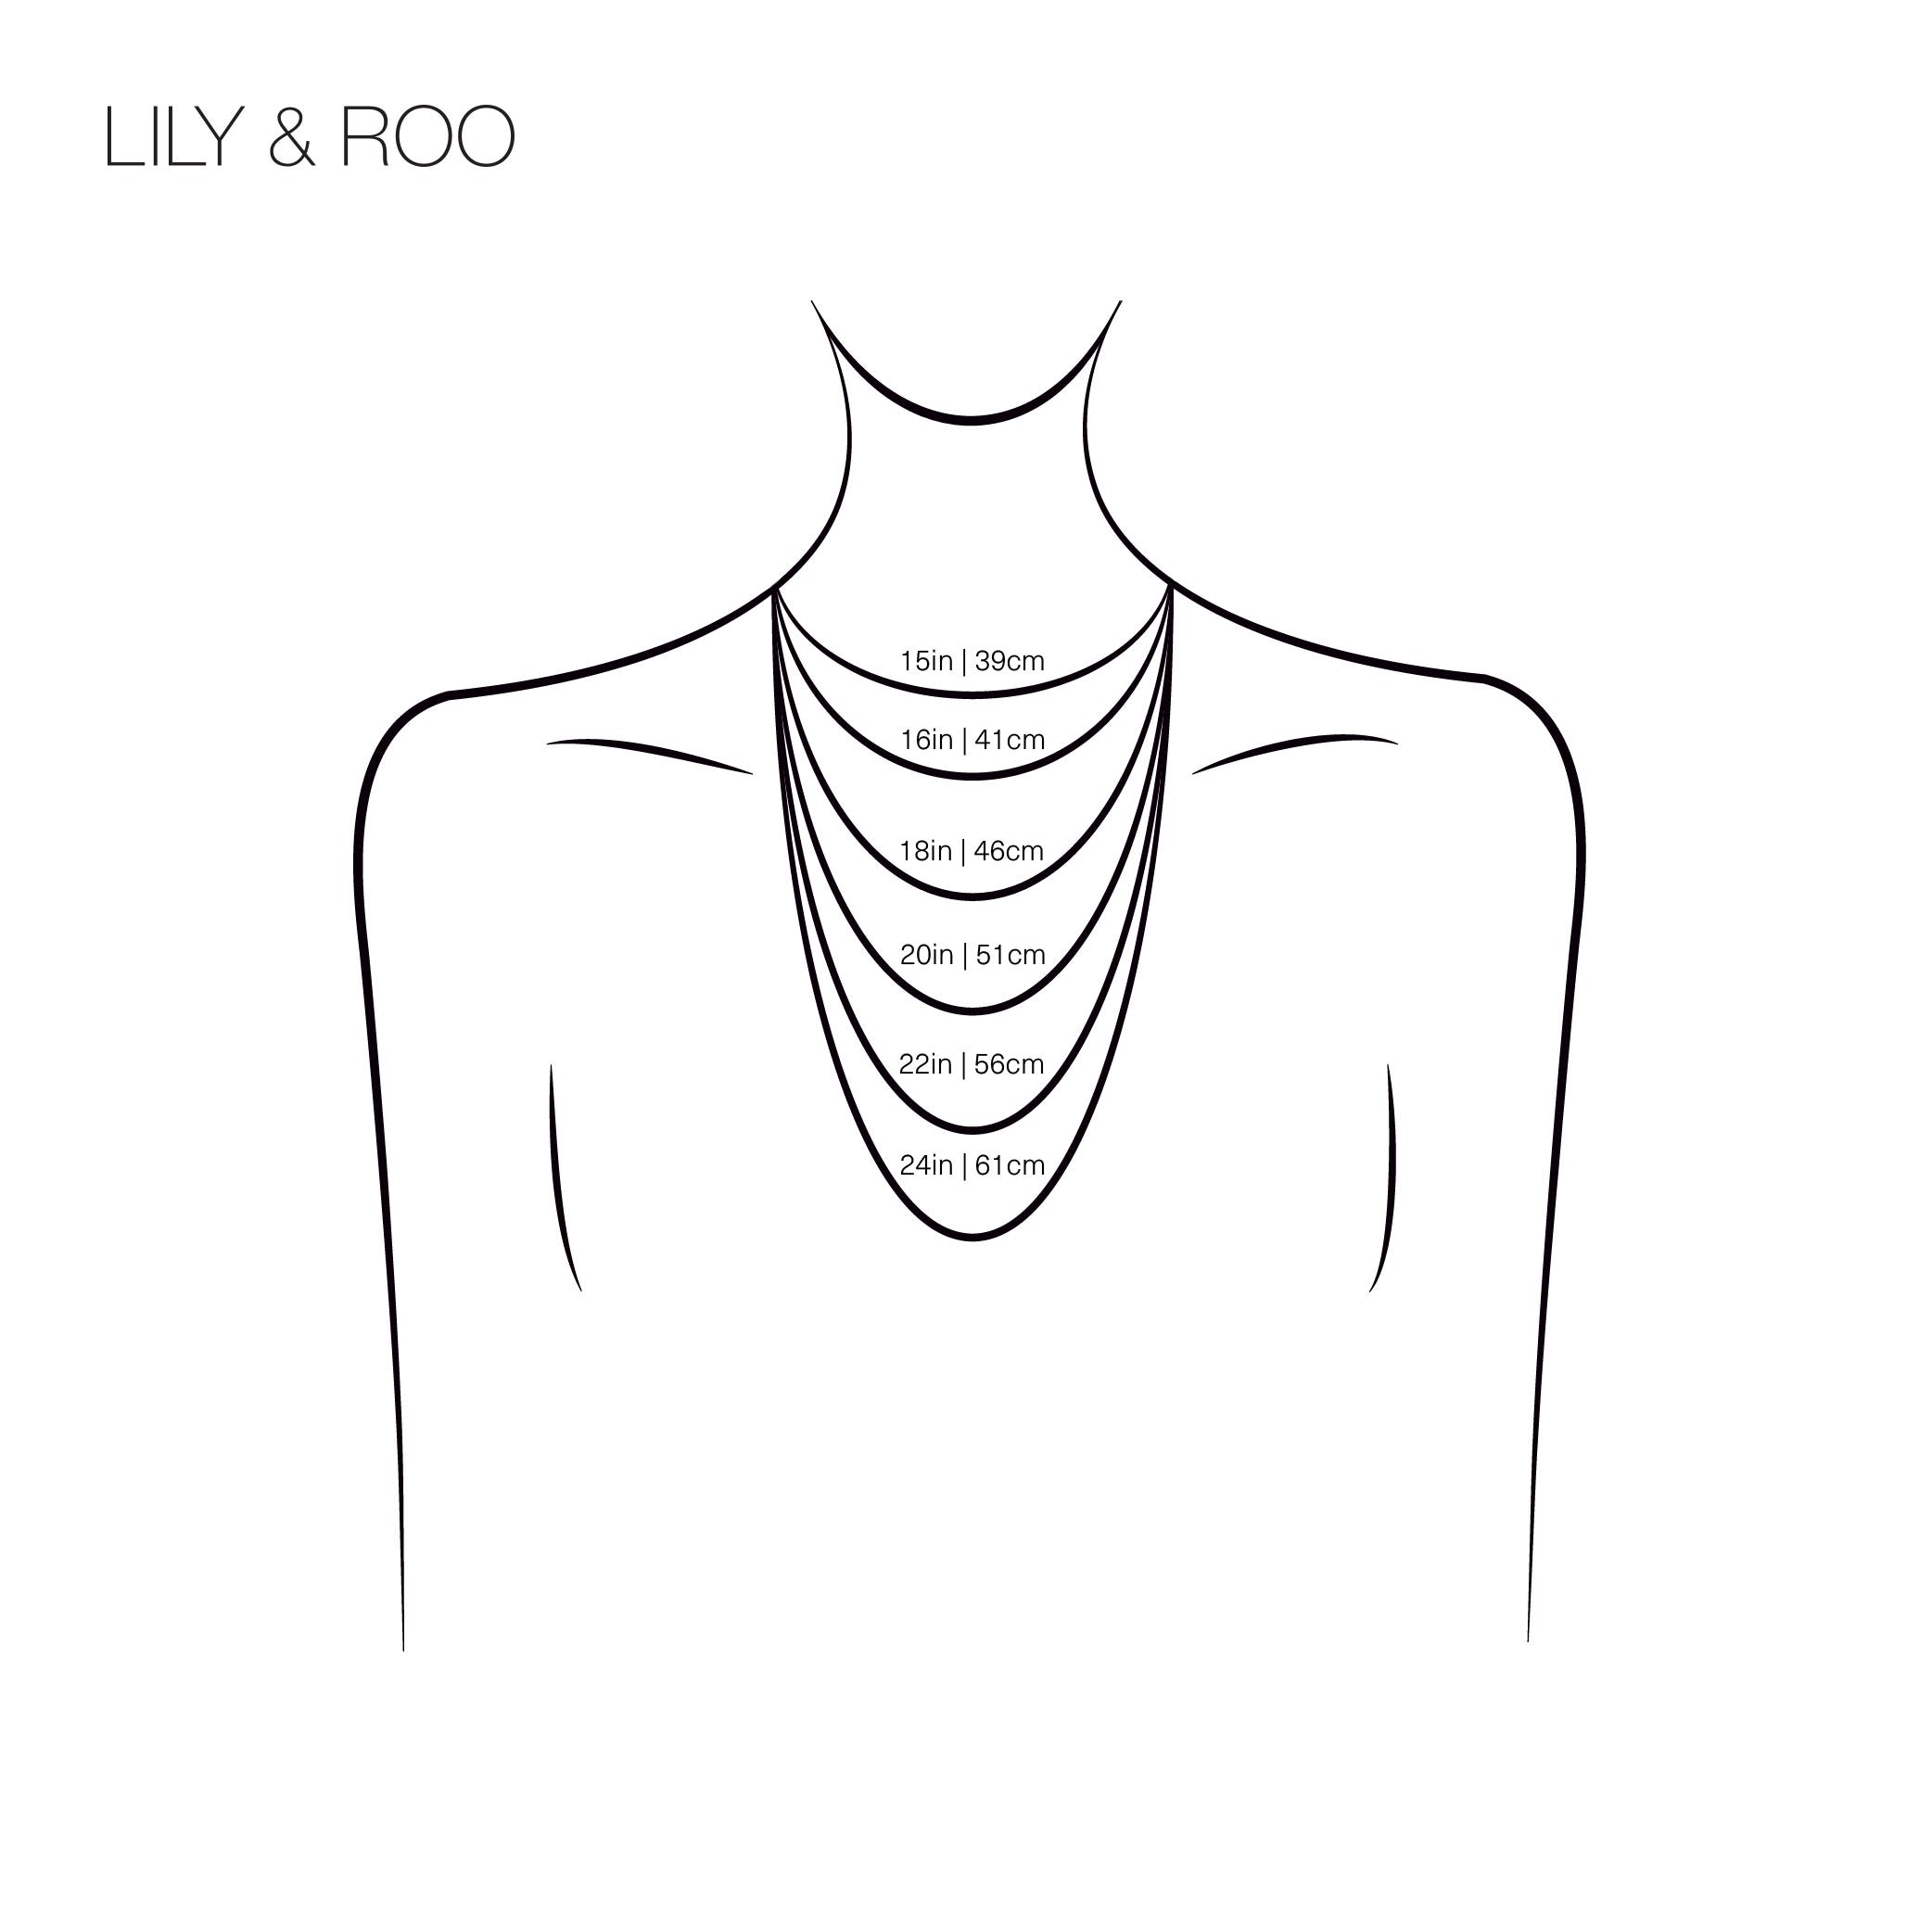 Female silhouette drawing with different necklace sizes displayed on her neck